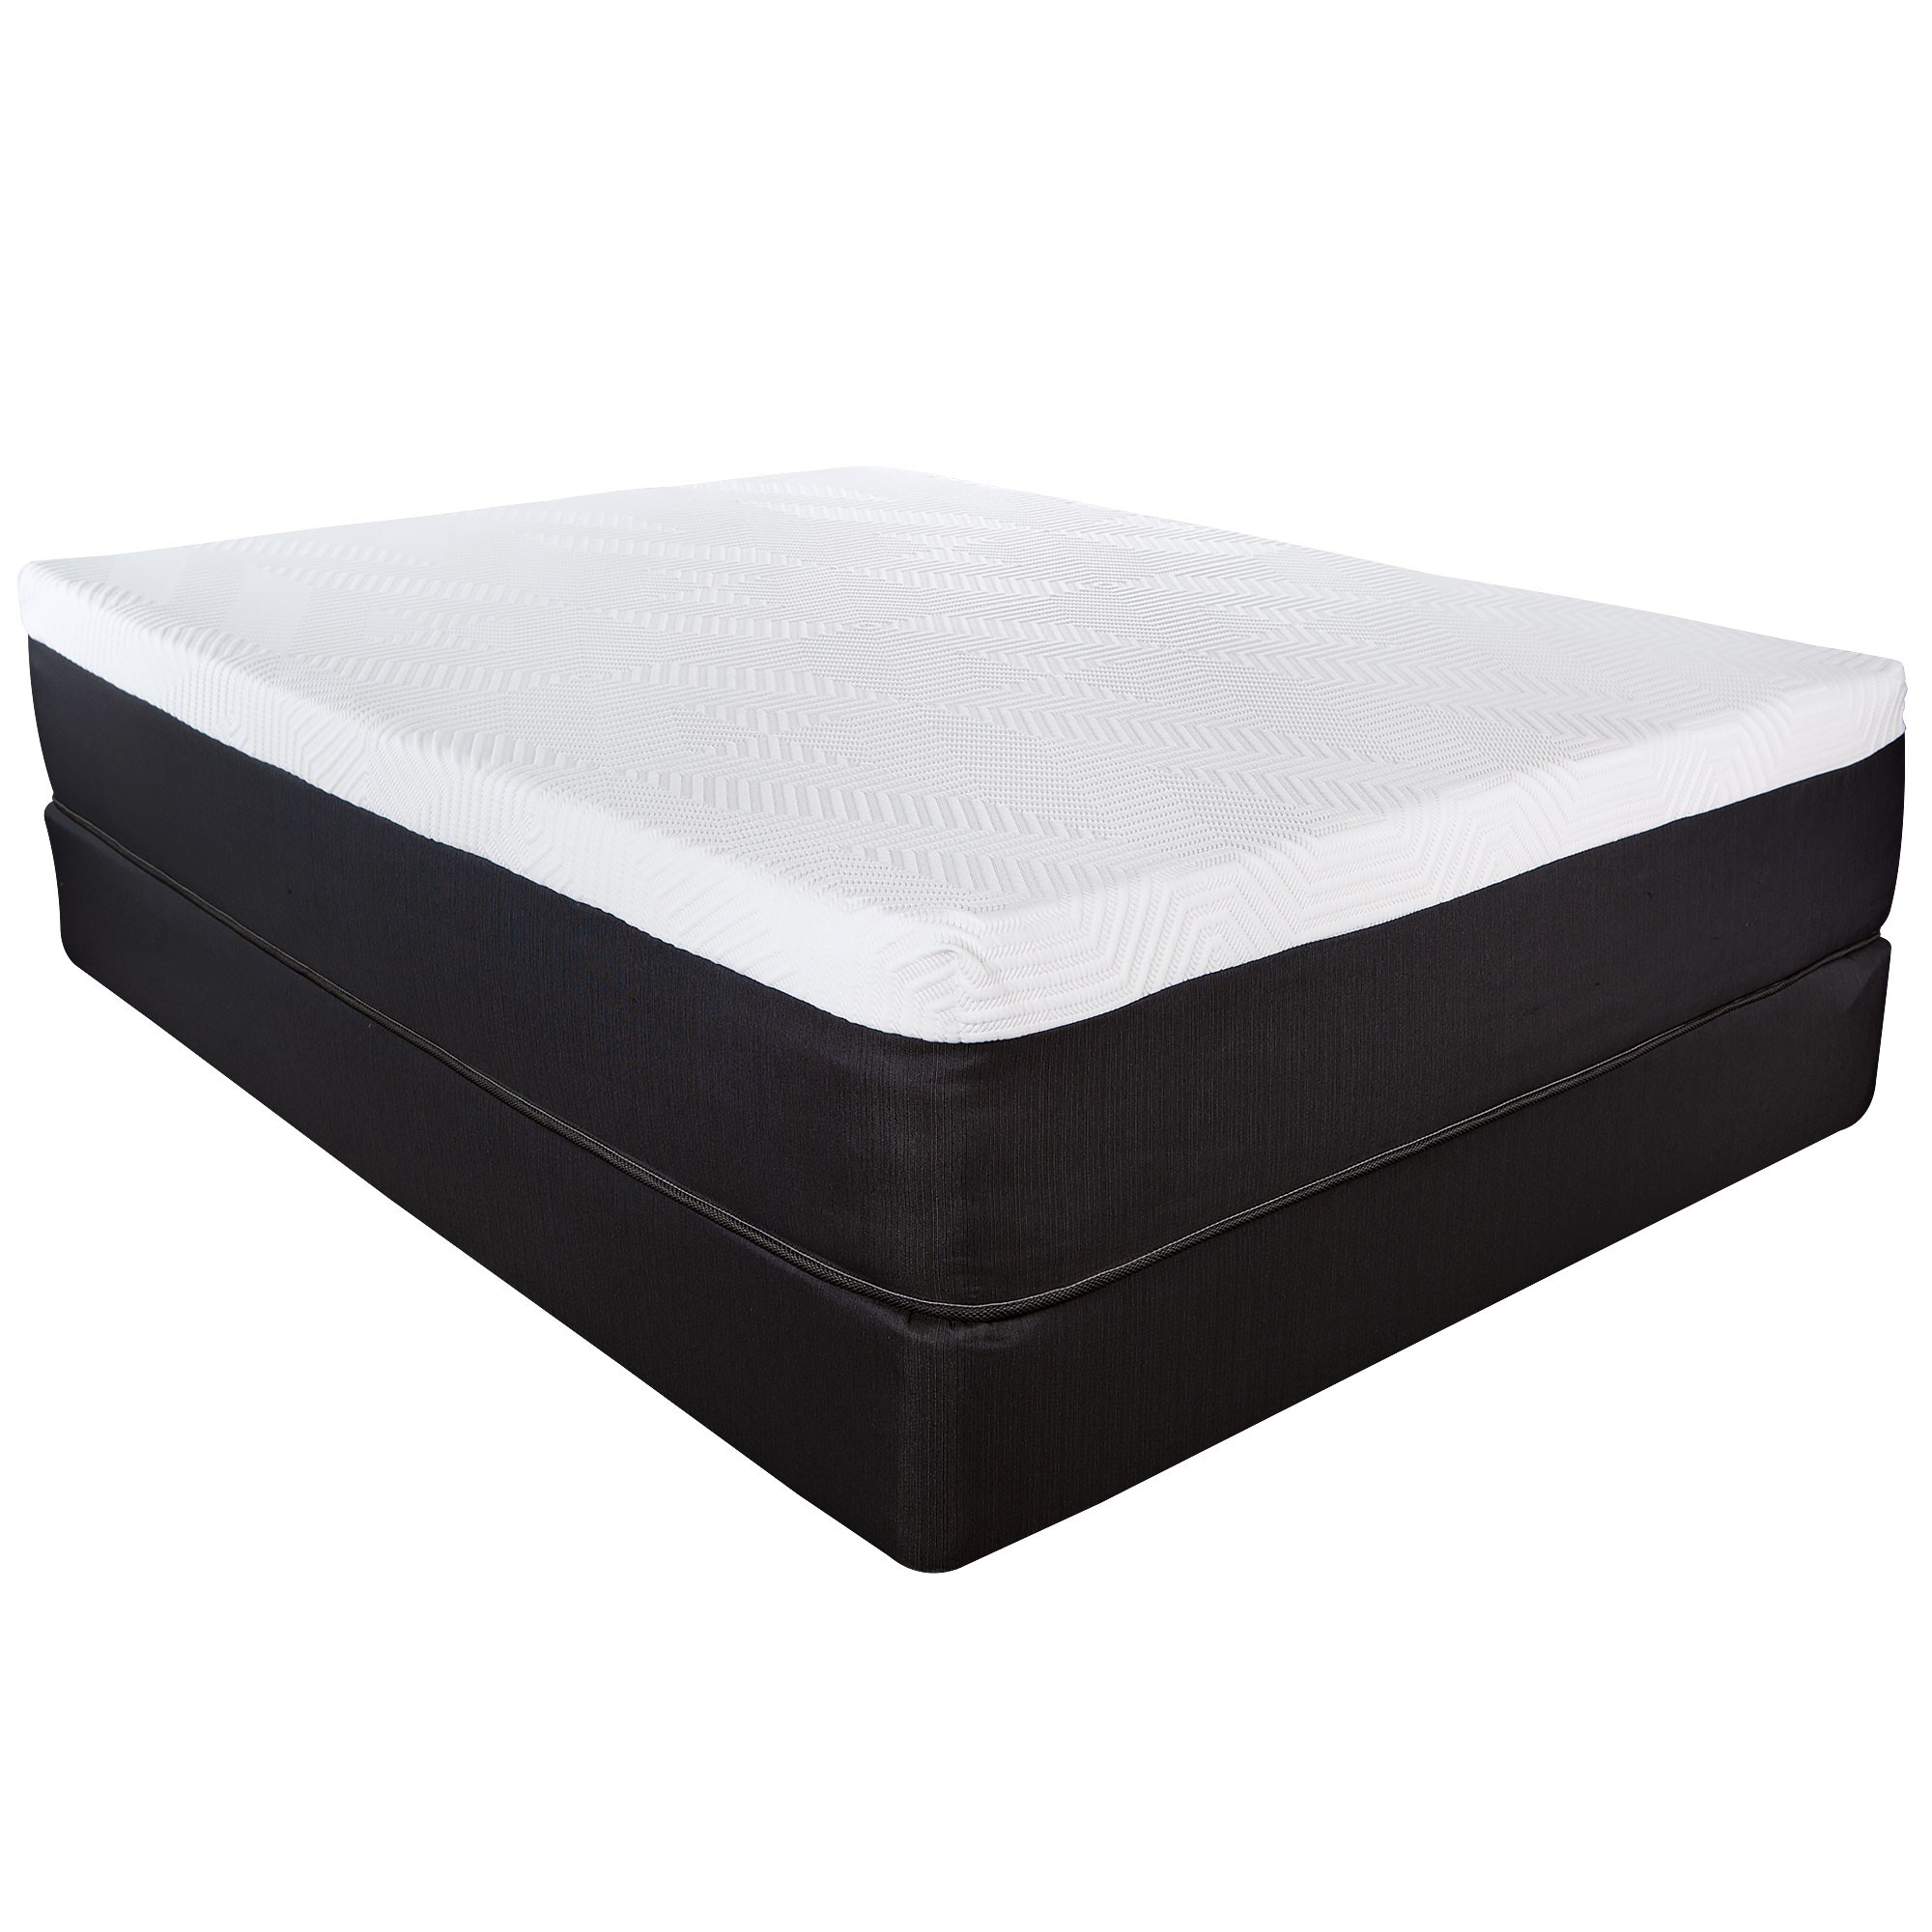 13" Hybrid Lux Memory Foam And Wrapped Coil Mattress Full Cal King-391699-1